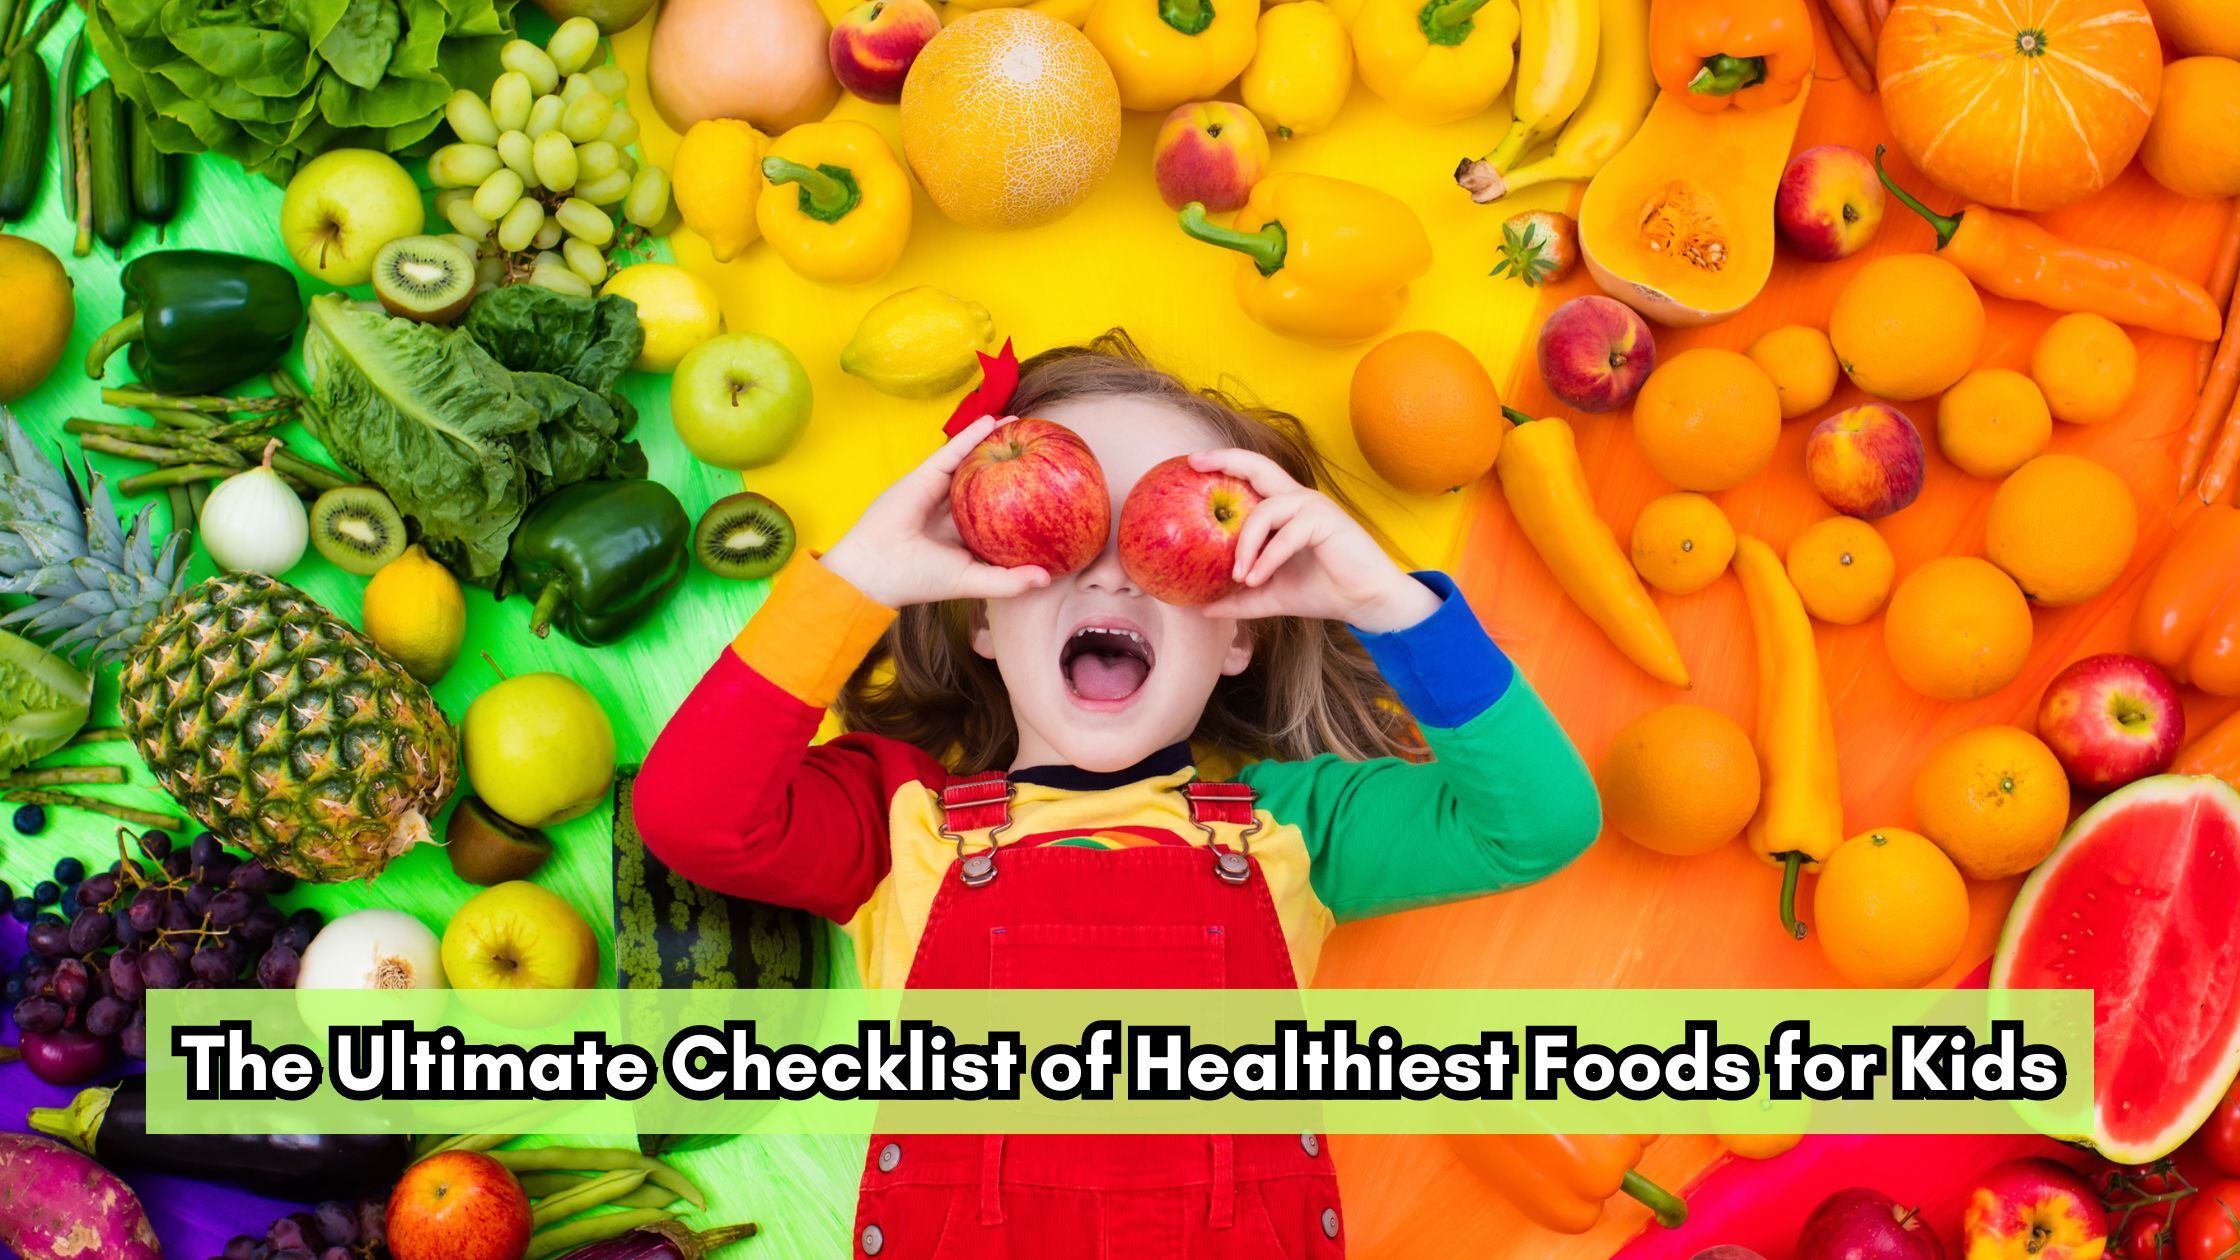 The Ultimate Checklist of Healthiest Foods for Kids